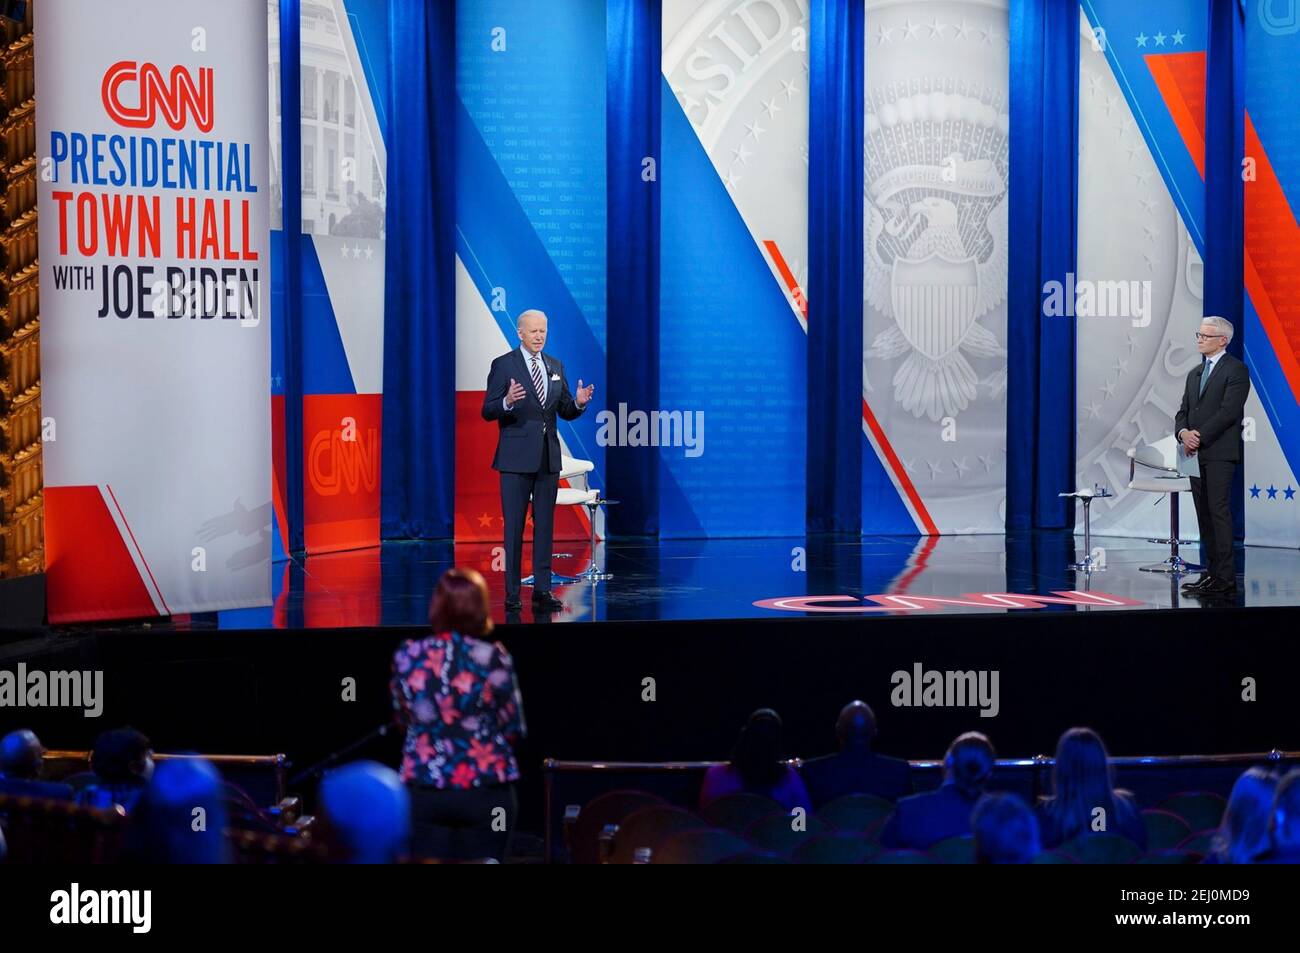 U.S President Joe Biden takes part in a CNN Town Hall event moderated by Anderson Cooper at the Pabst Theater February 16, 2021 in Milwaukee, Wisconsin. Stock Photo